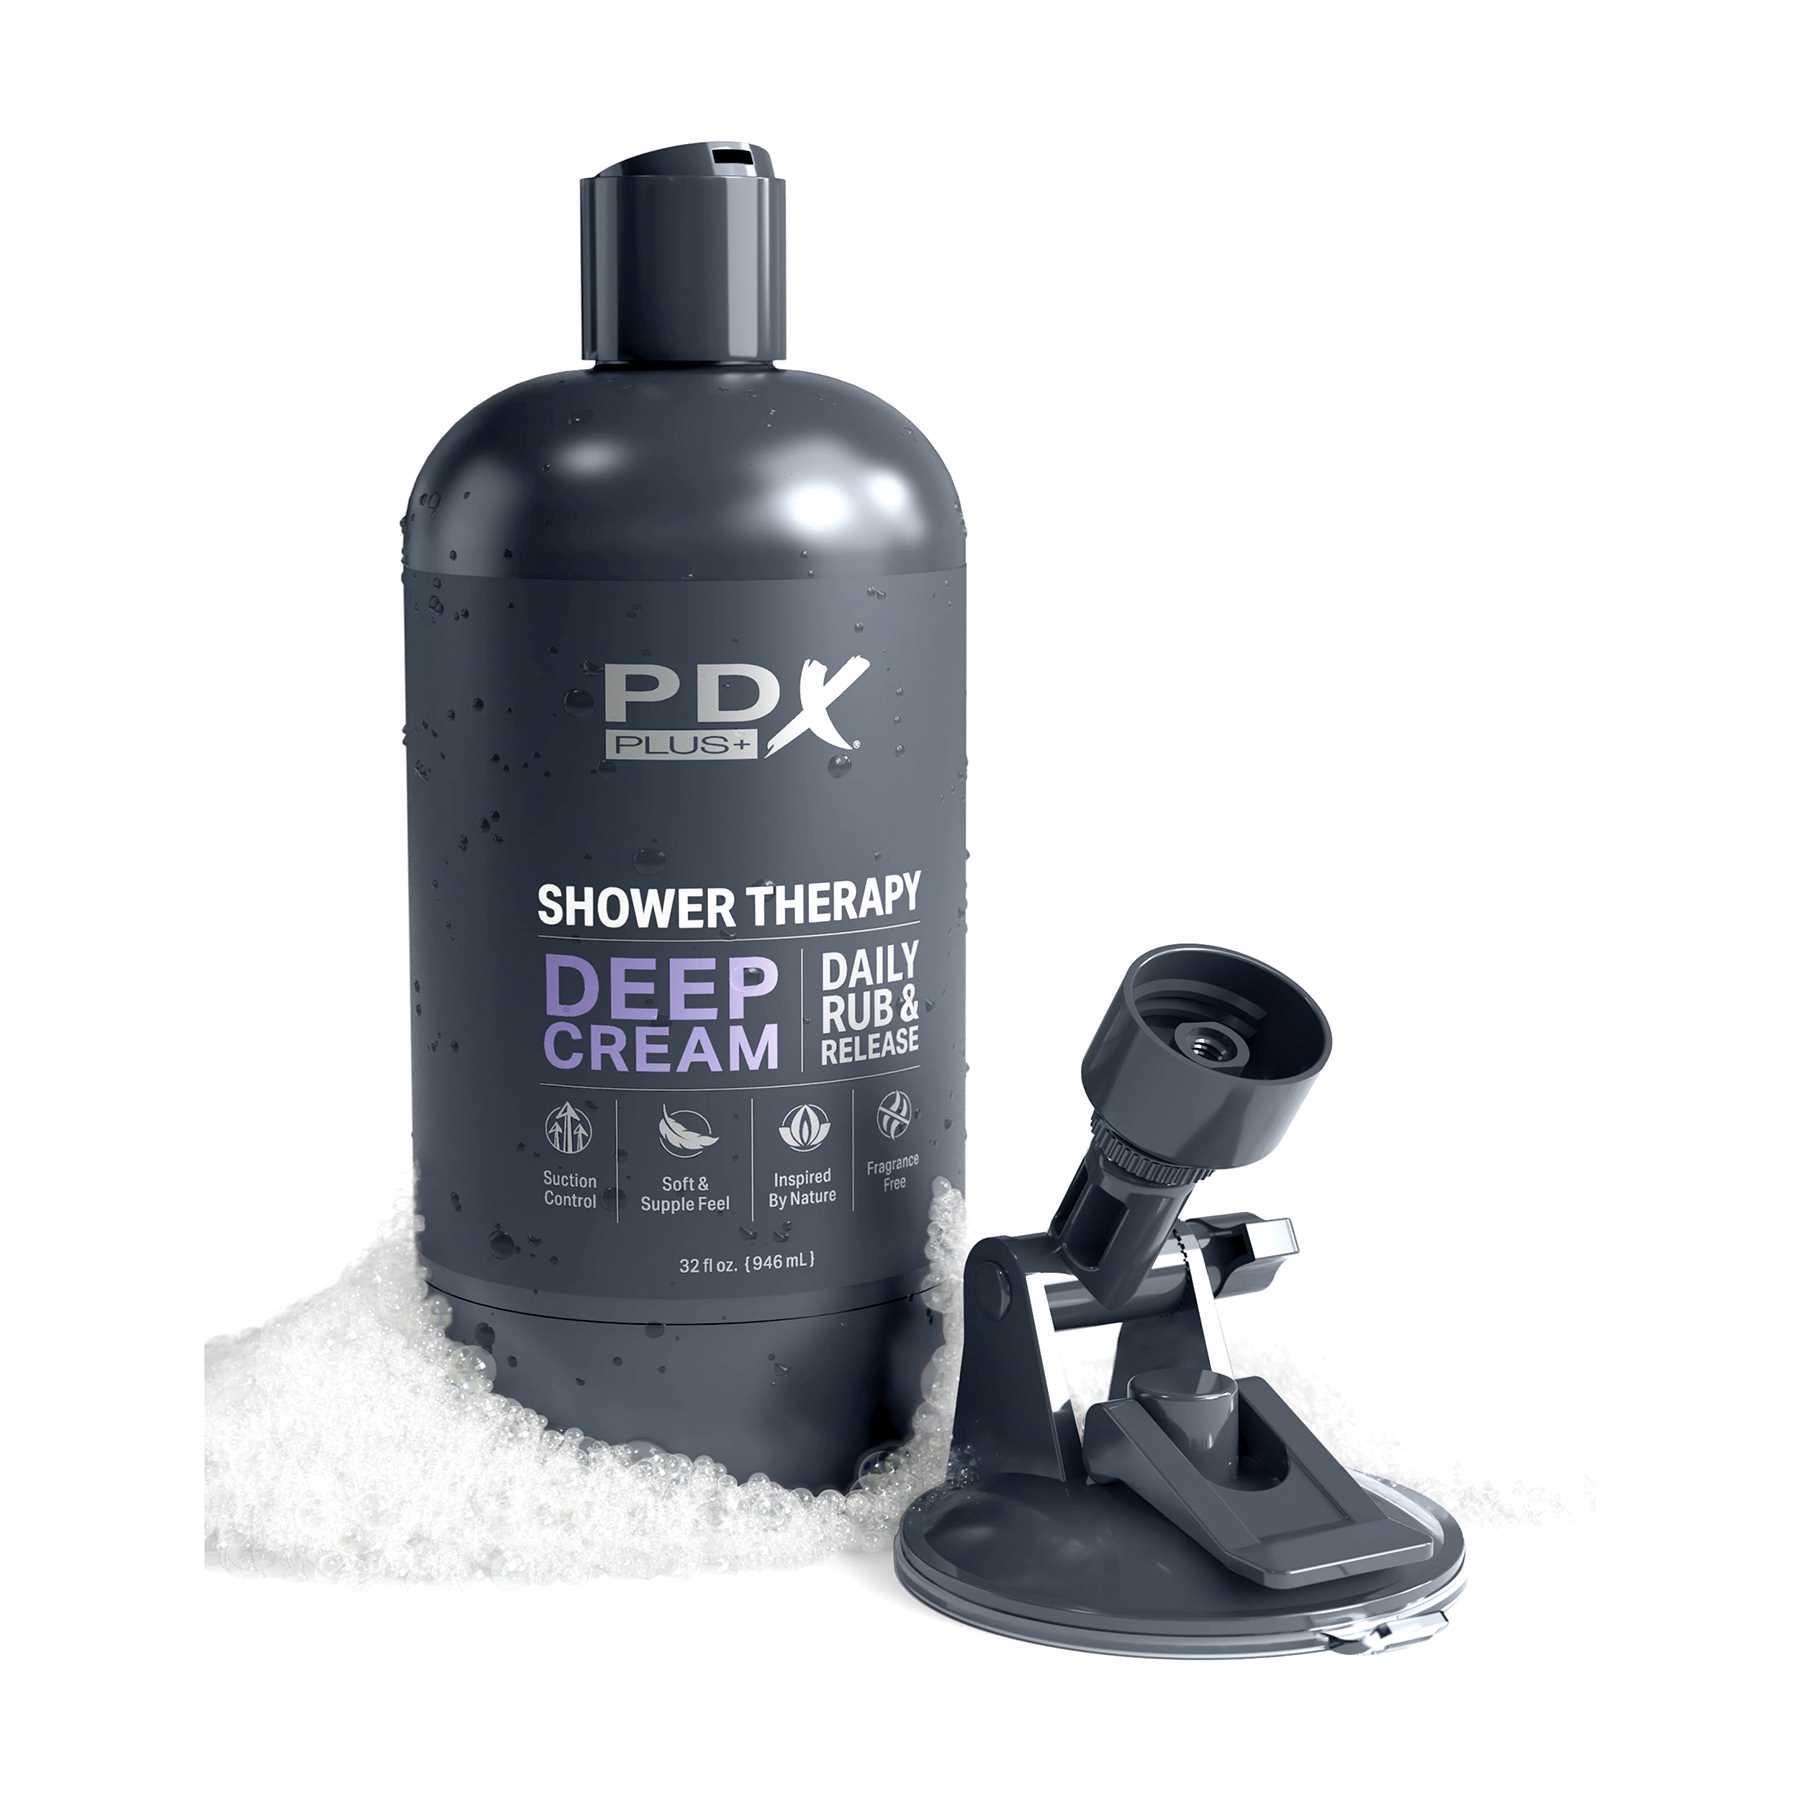 PDX Plus Shower Therapy Deep Cream Discreet Stroker with mount beside